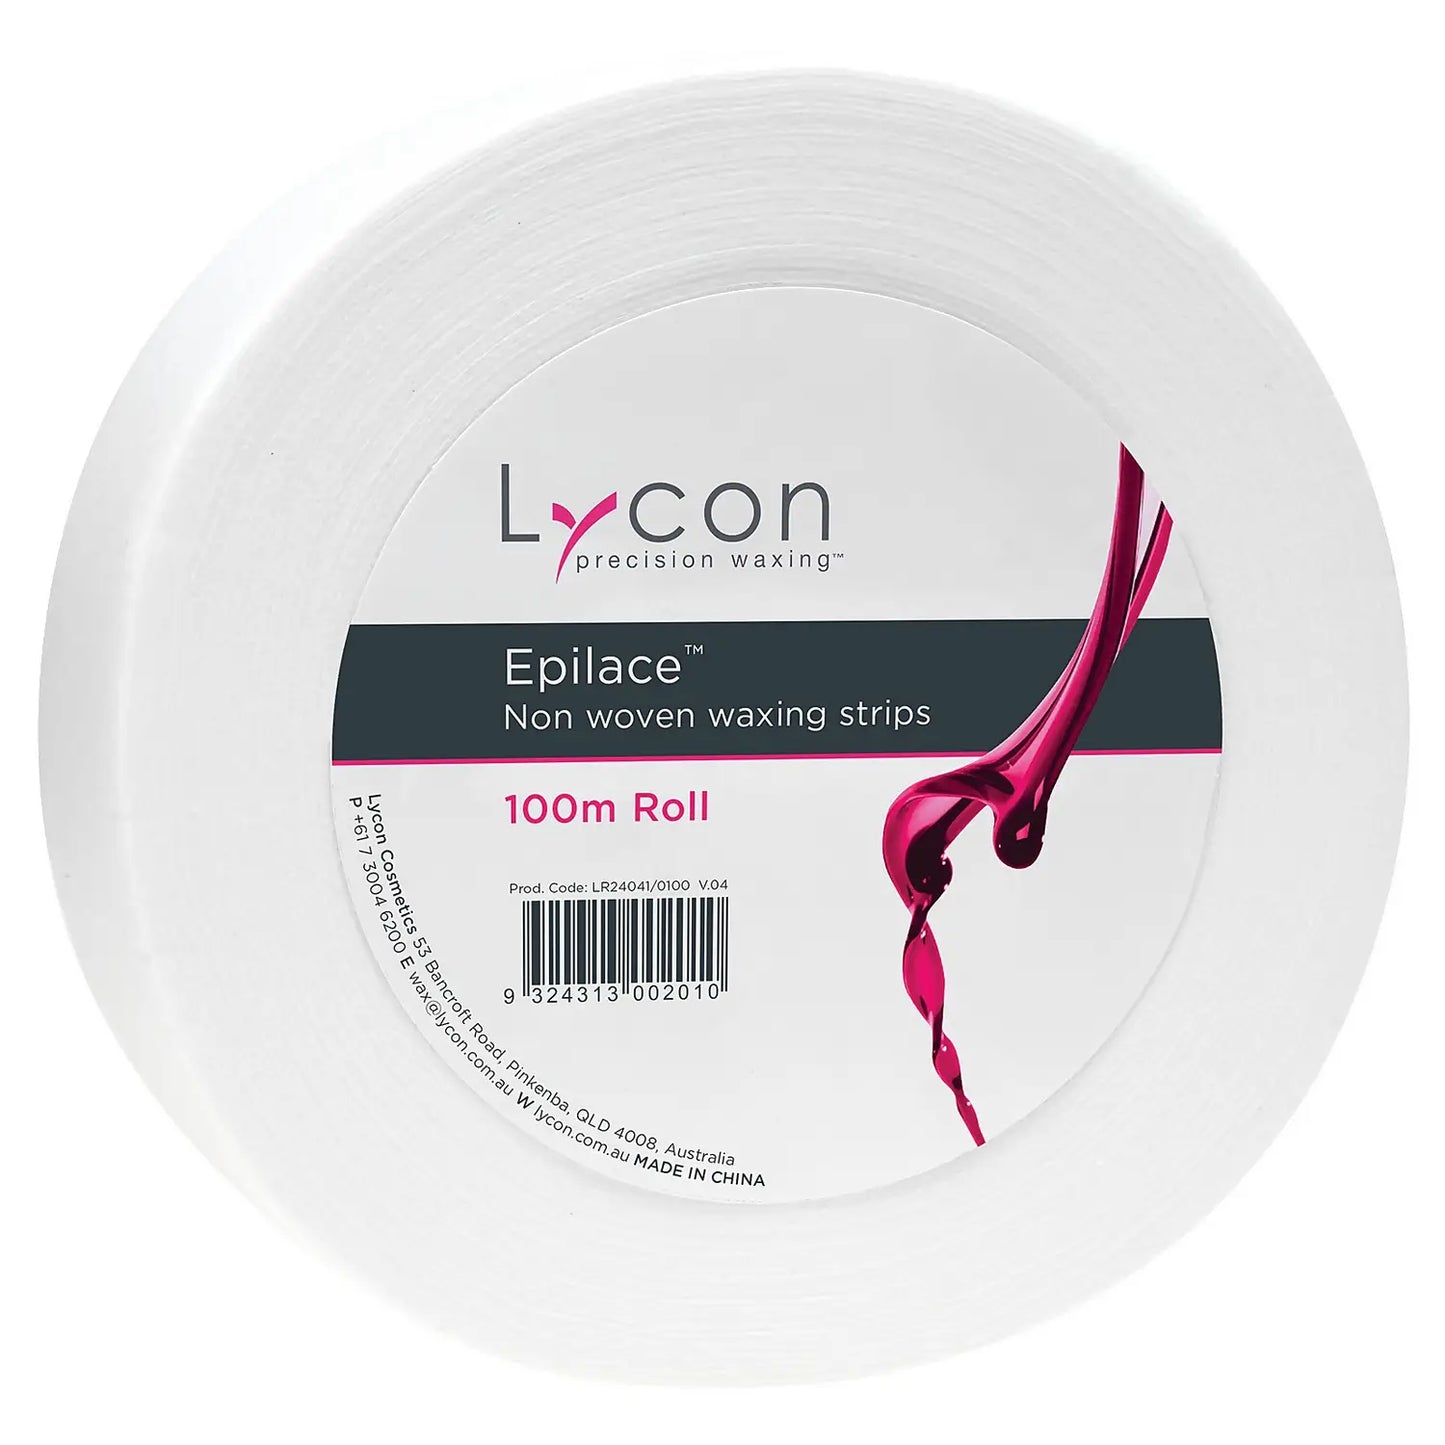 Lycon Epilace Waxing Roll 100m